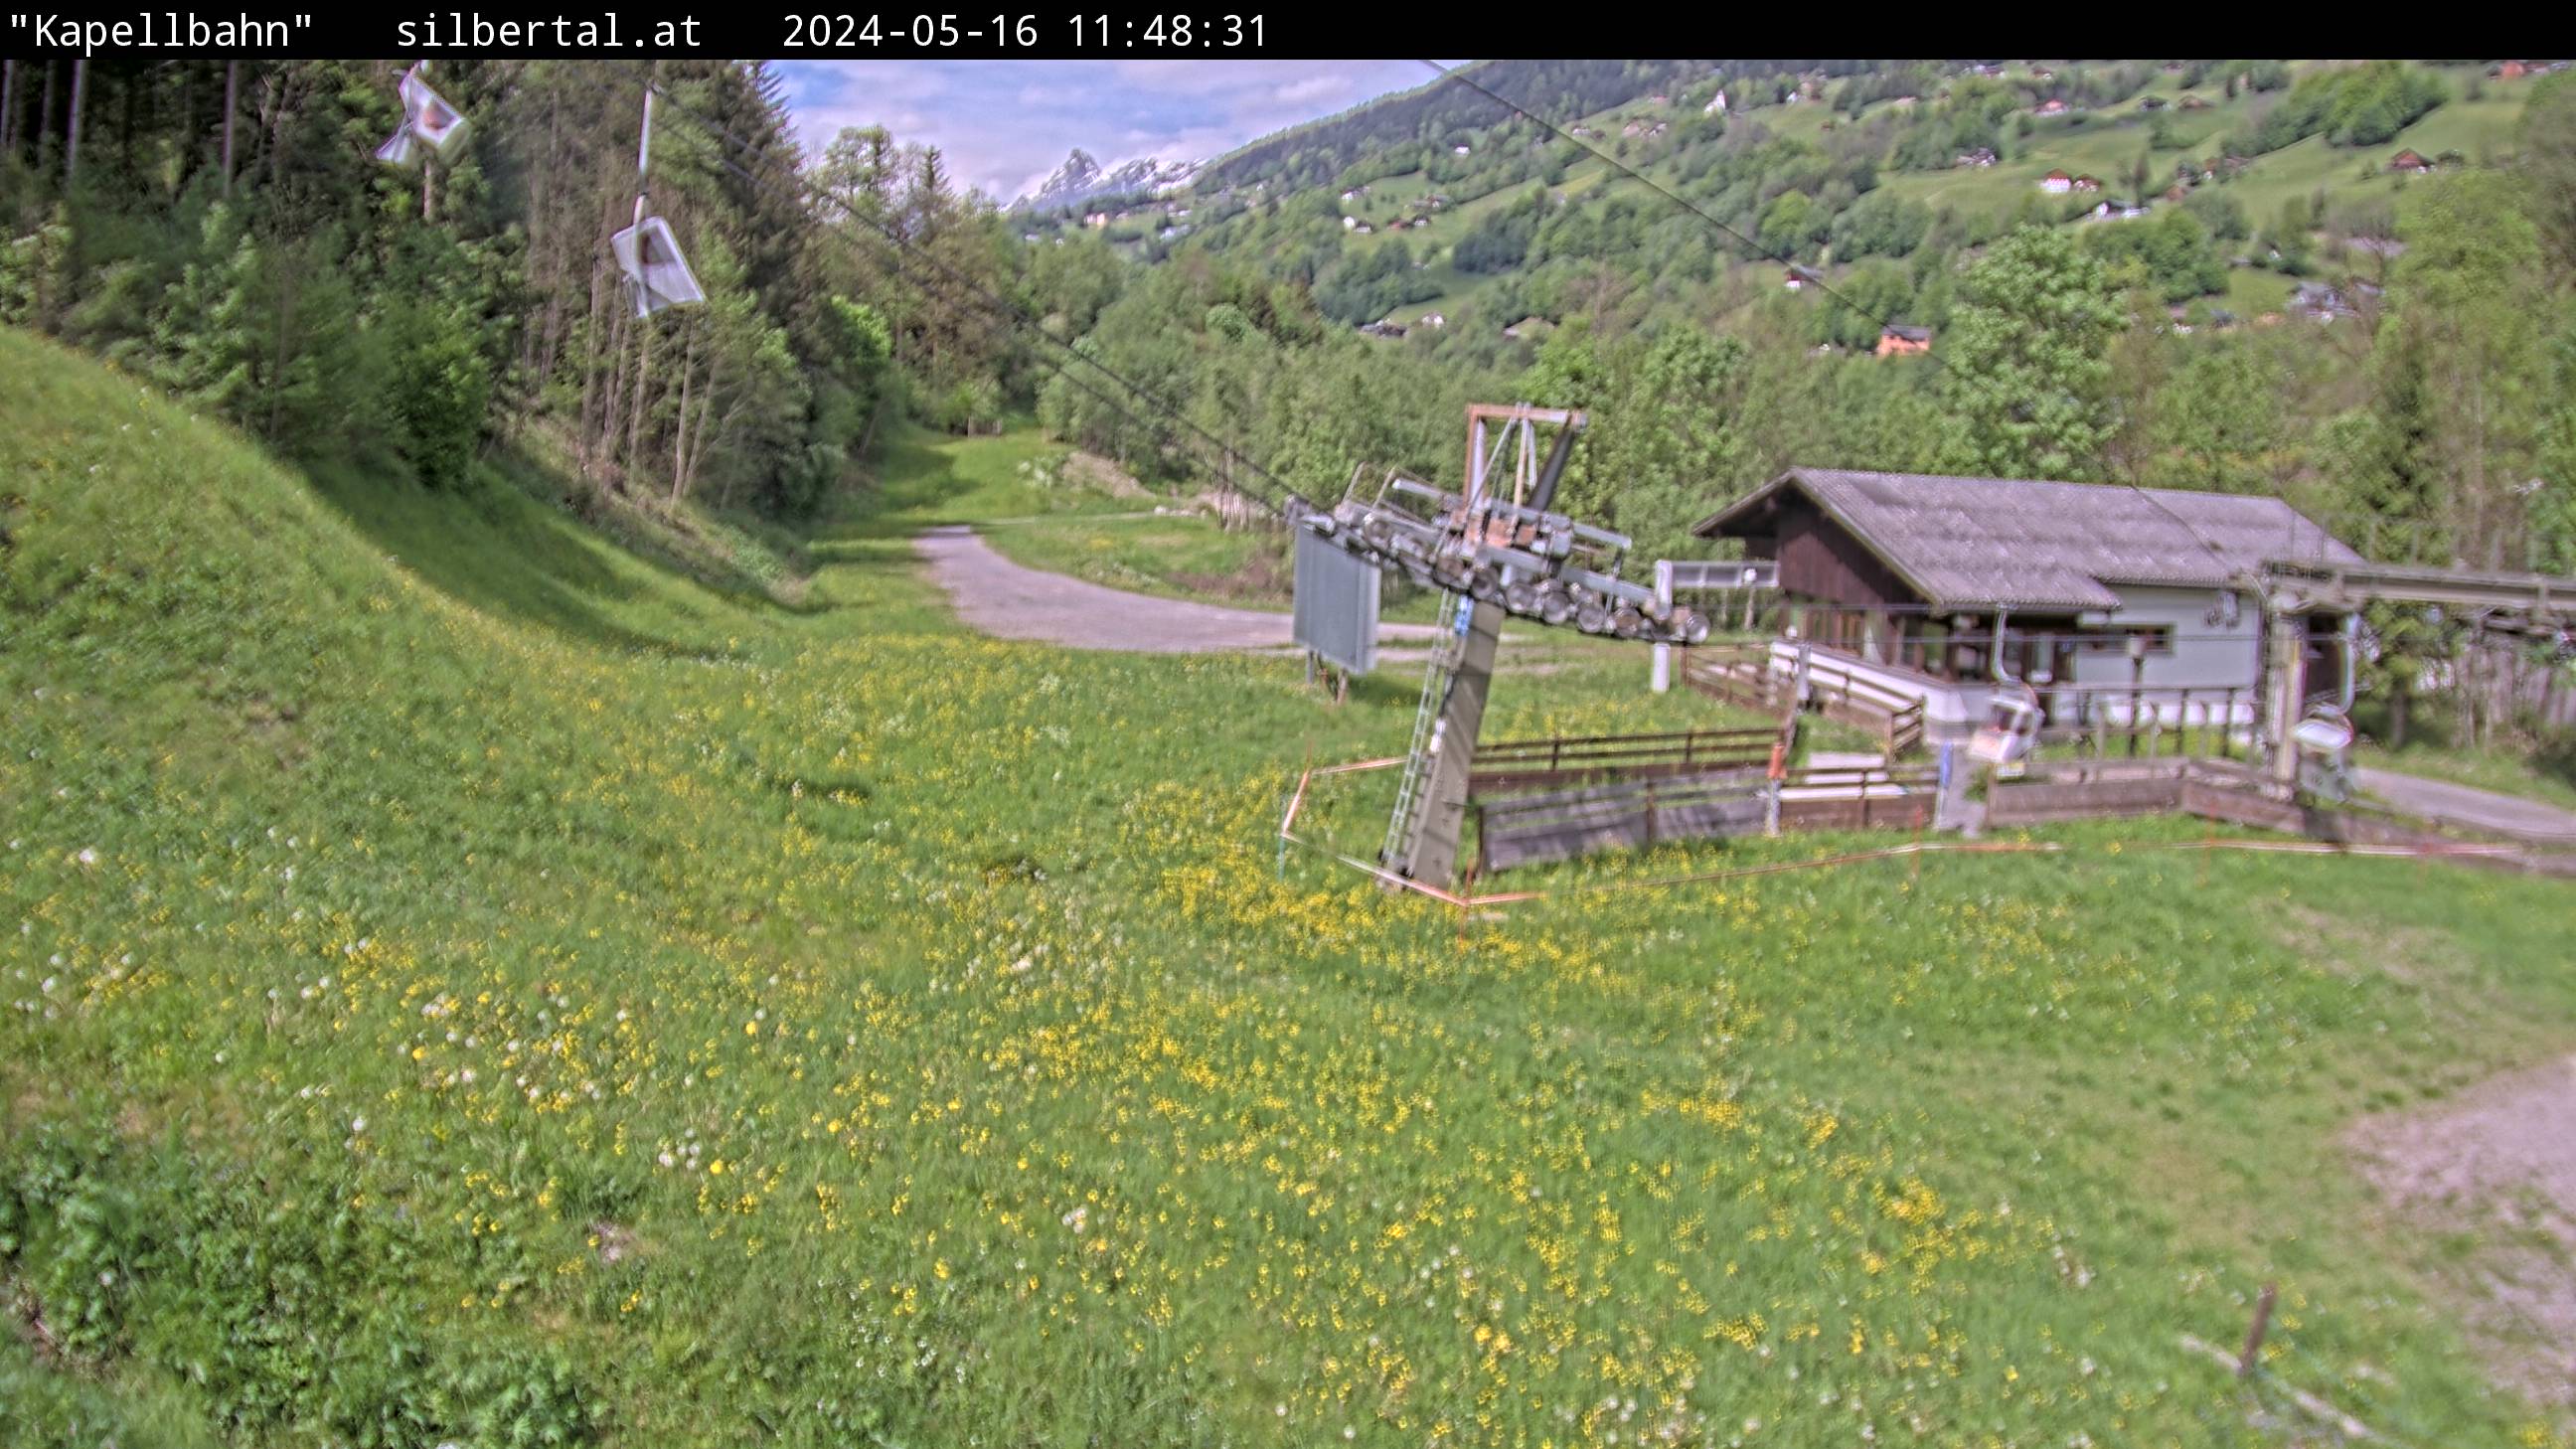 The webcam with this live image shows the Kapellbahn from Silbertal (http://www.silbertal.at). 